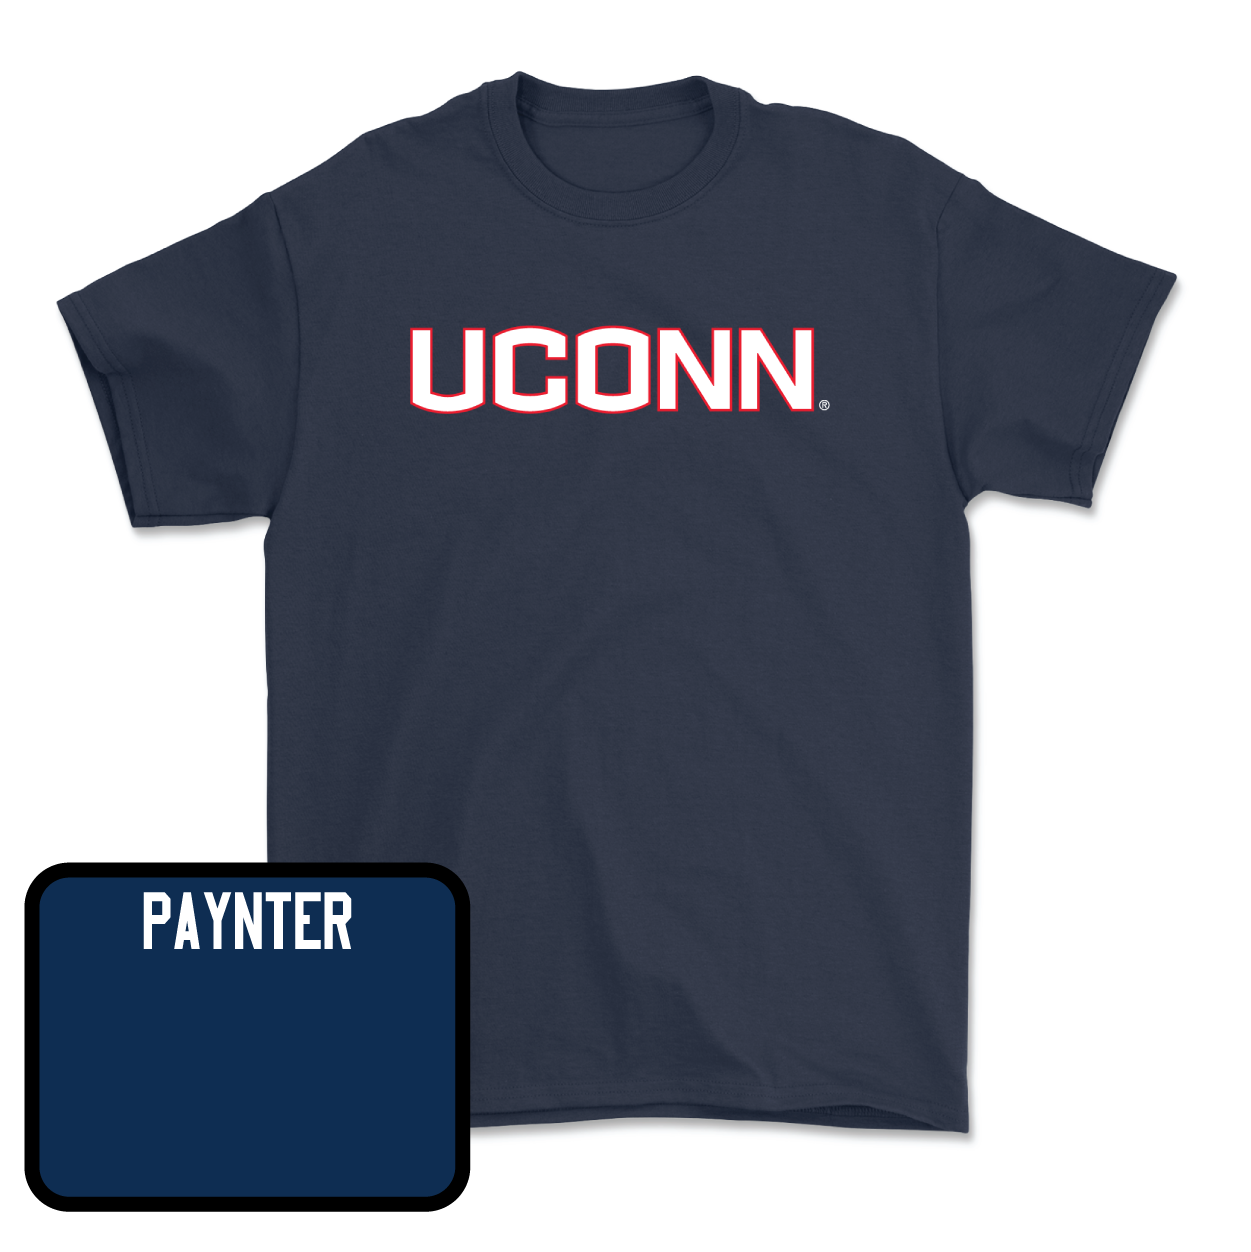 Navy Women's Rowing UConn Tee Youth Large / Emma Paynter